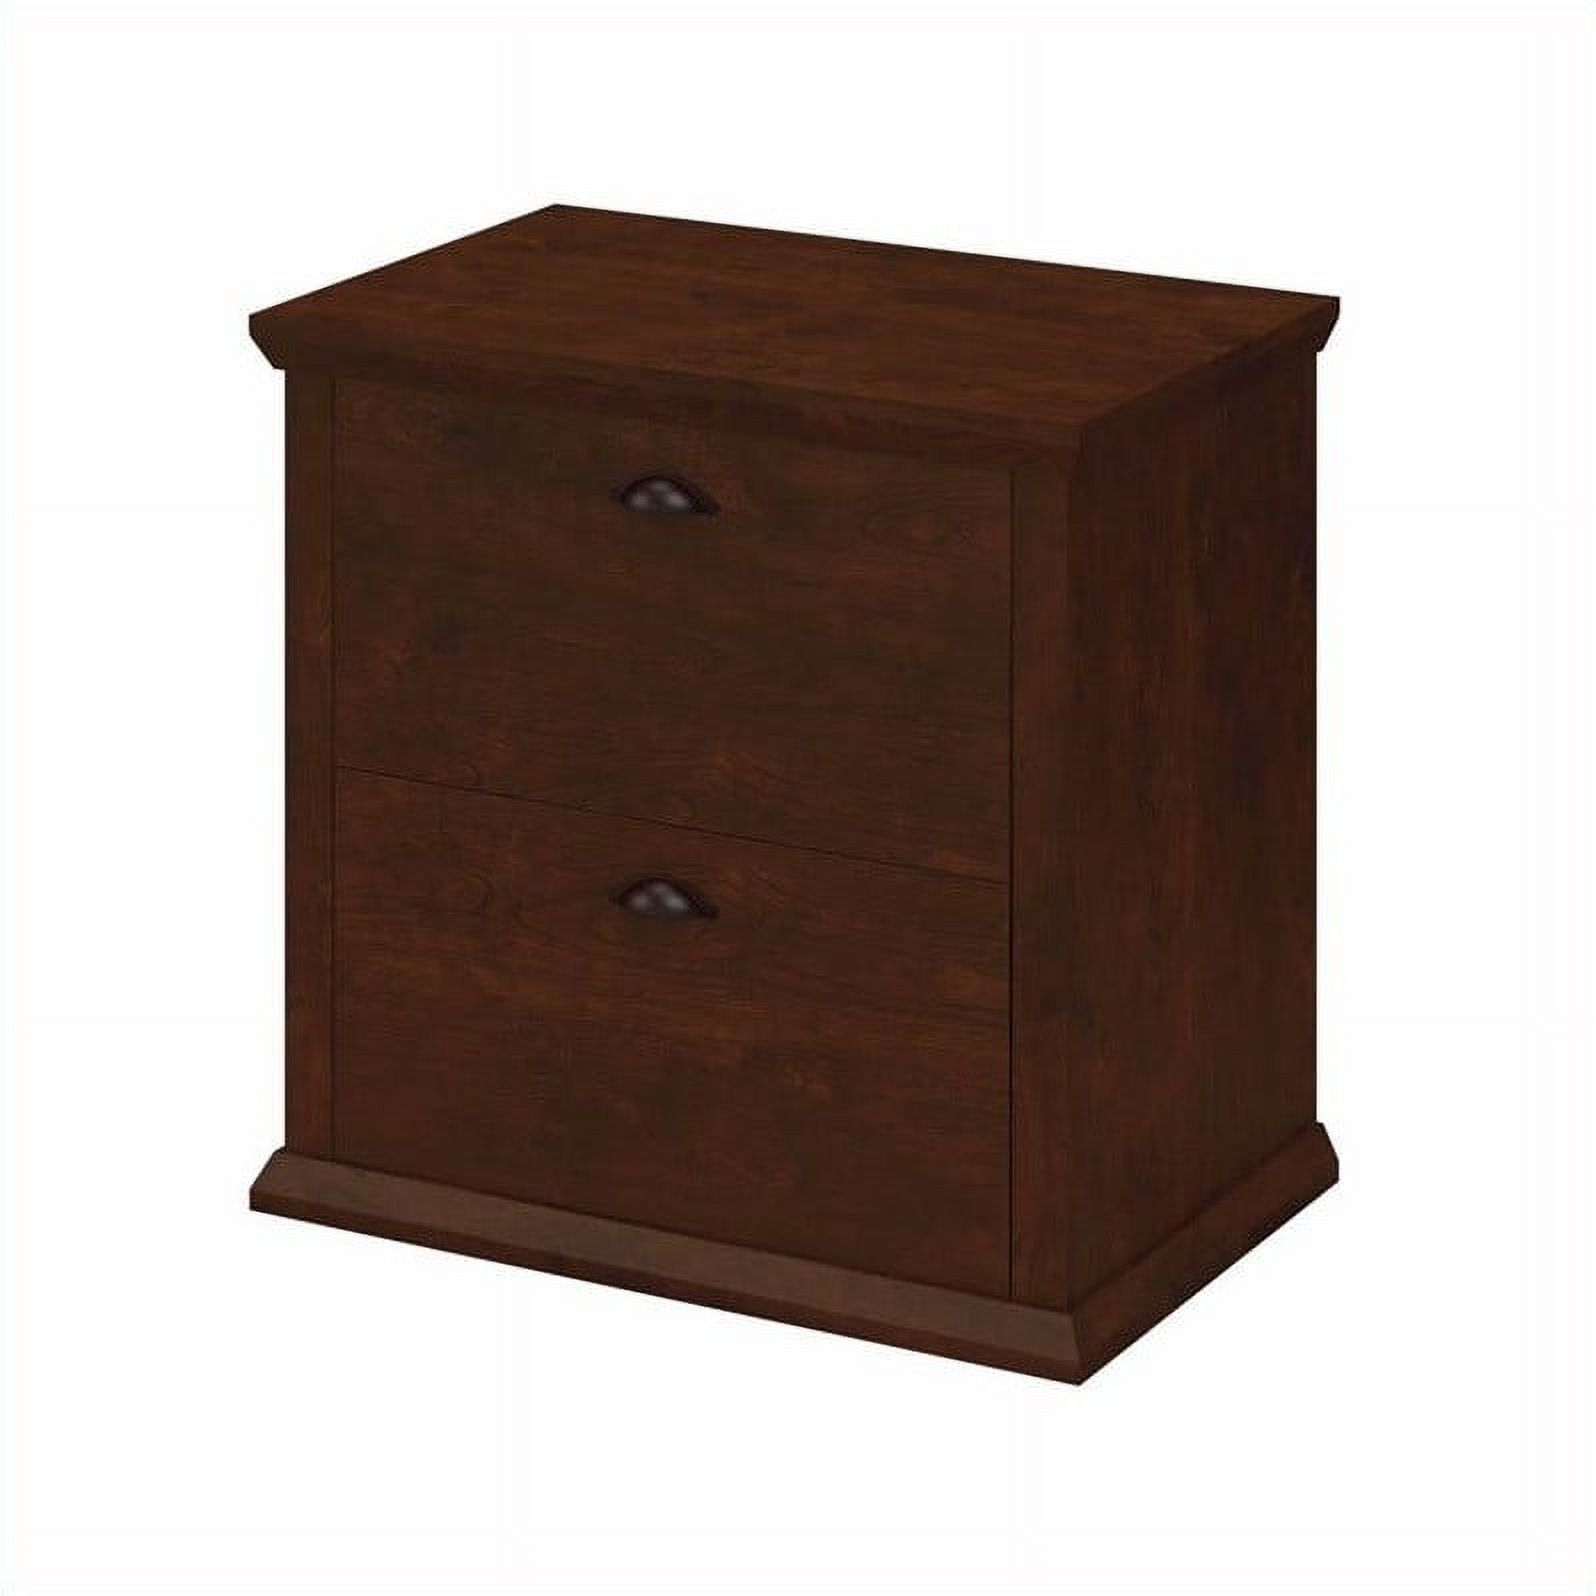 Scranton & Co 2 Drawer Lateral File Cabinet in Antique Cherry - image 4 of 5